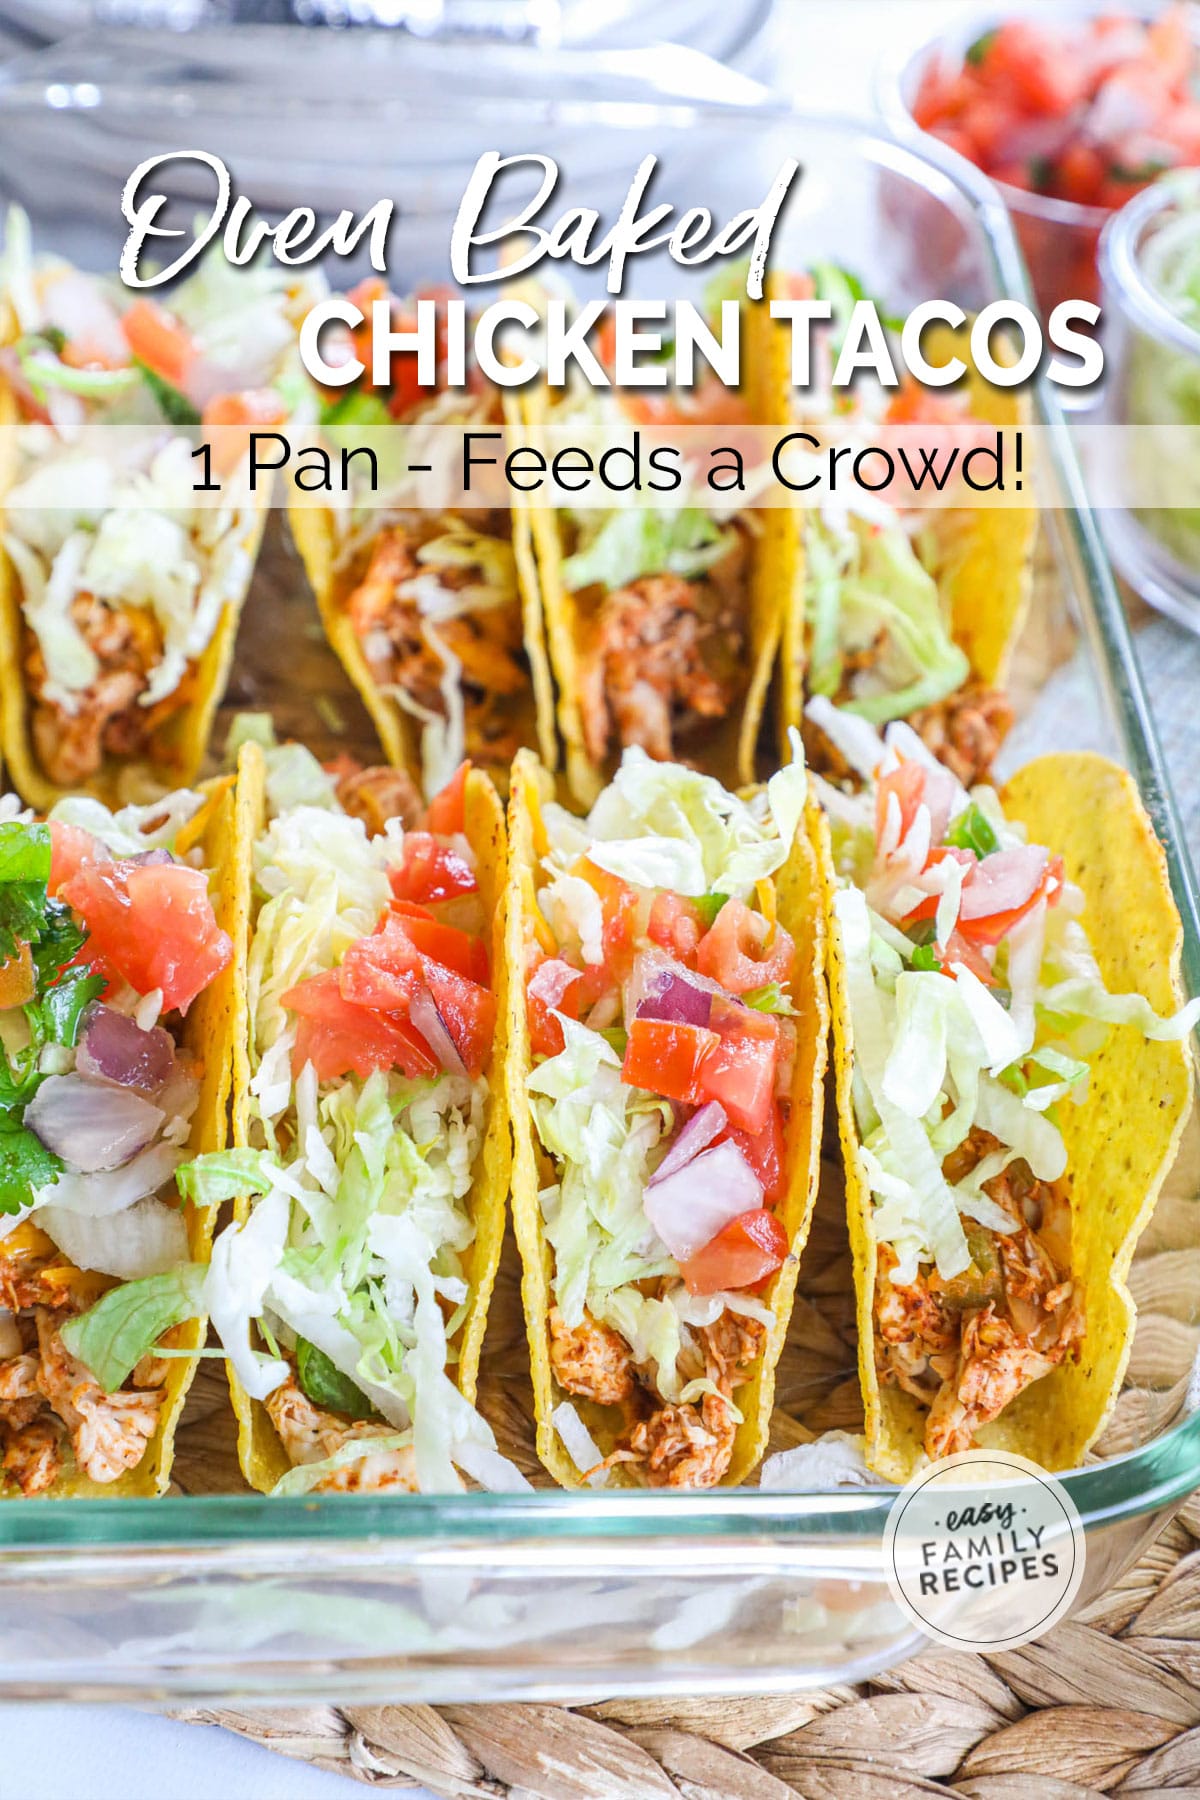 a pan of baked shredded chicken tacos with shredded lettuce and chopped tomatoes